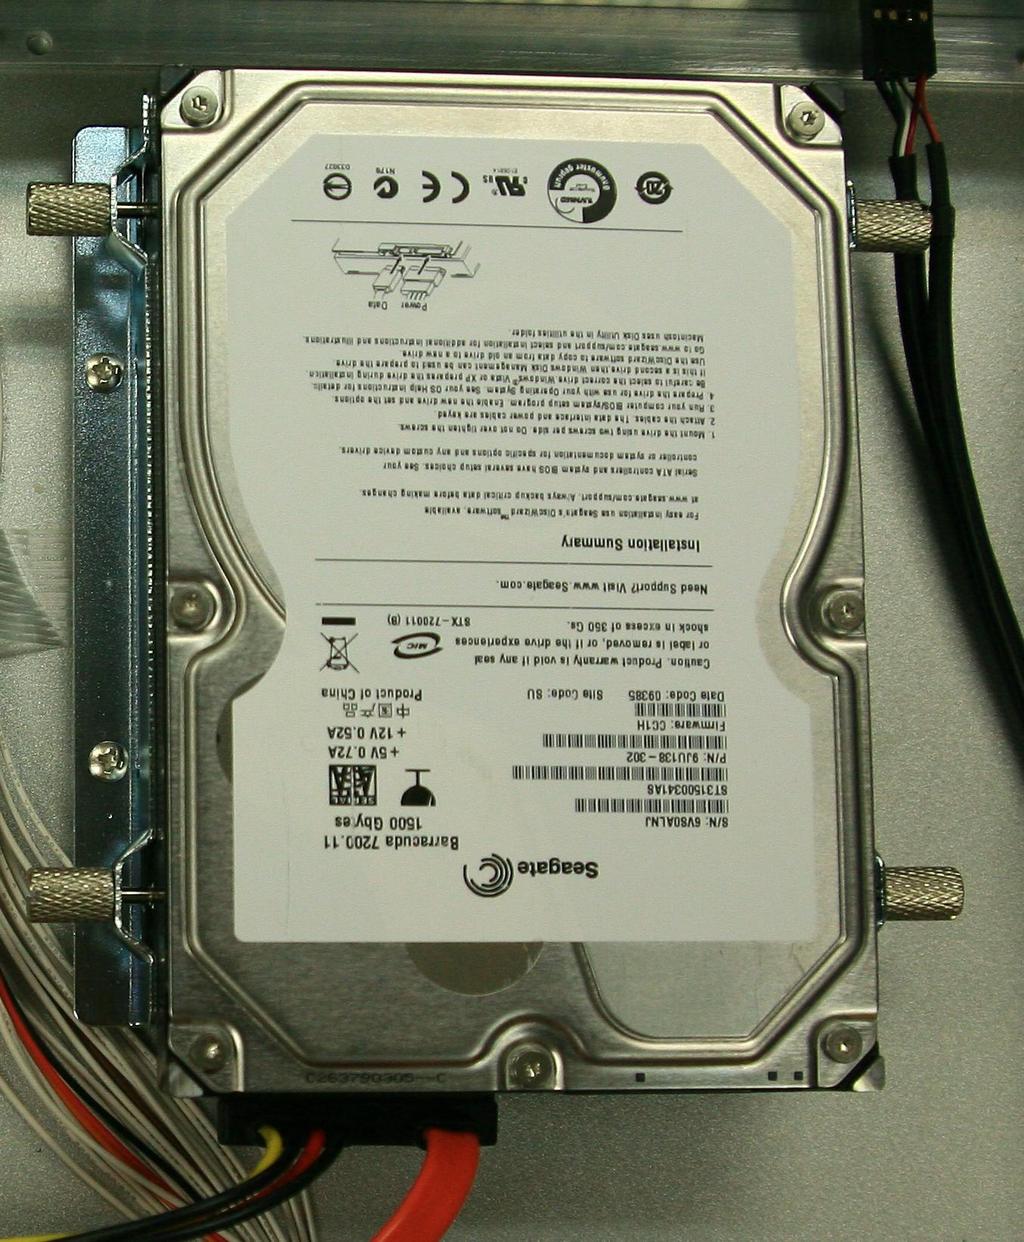 1.4 Mount the HDD to